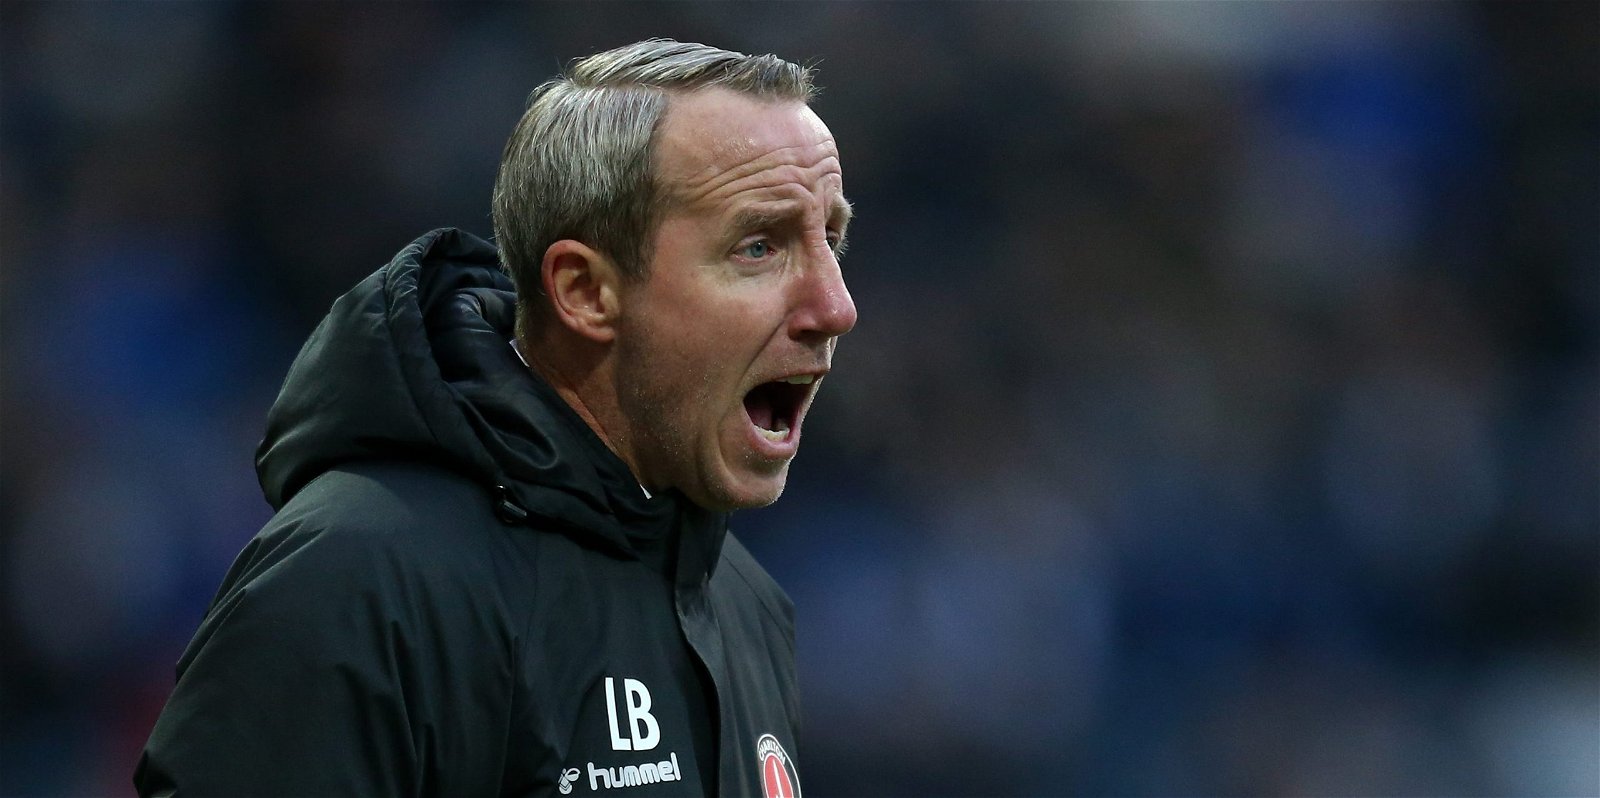 Charlton Athletic news, &#8220;It’s going to be exciting&#8221; &#8211; Charlton boss prepares for 9 cup finals